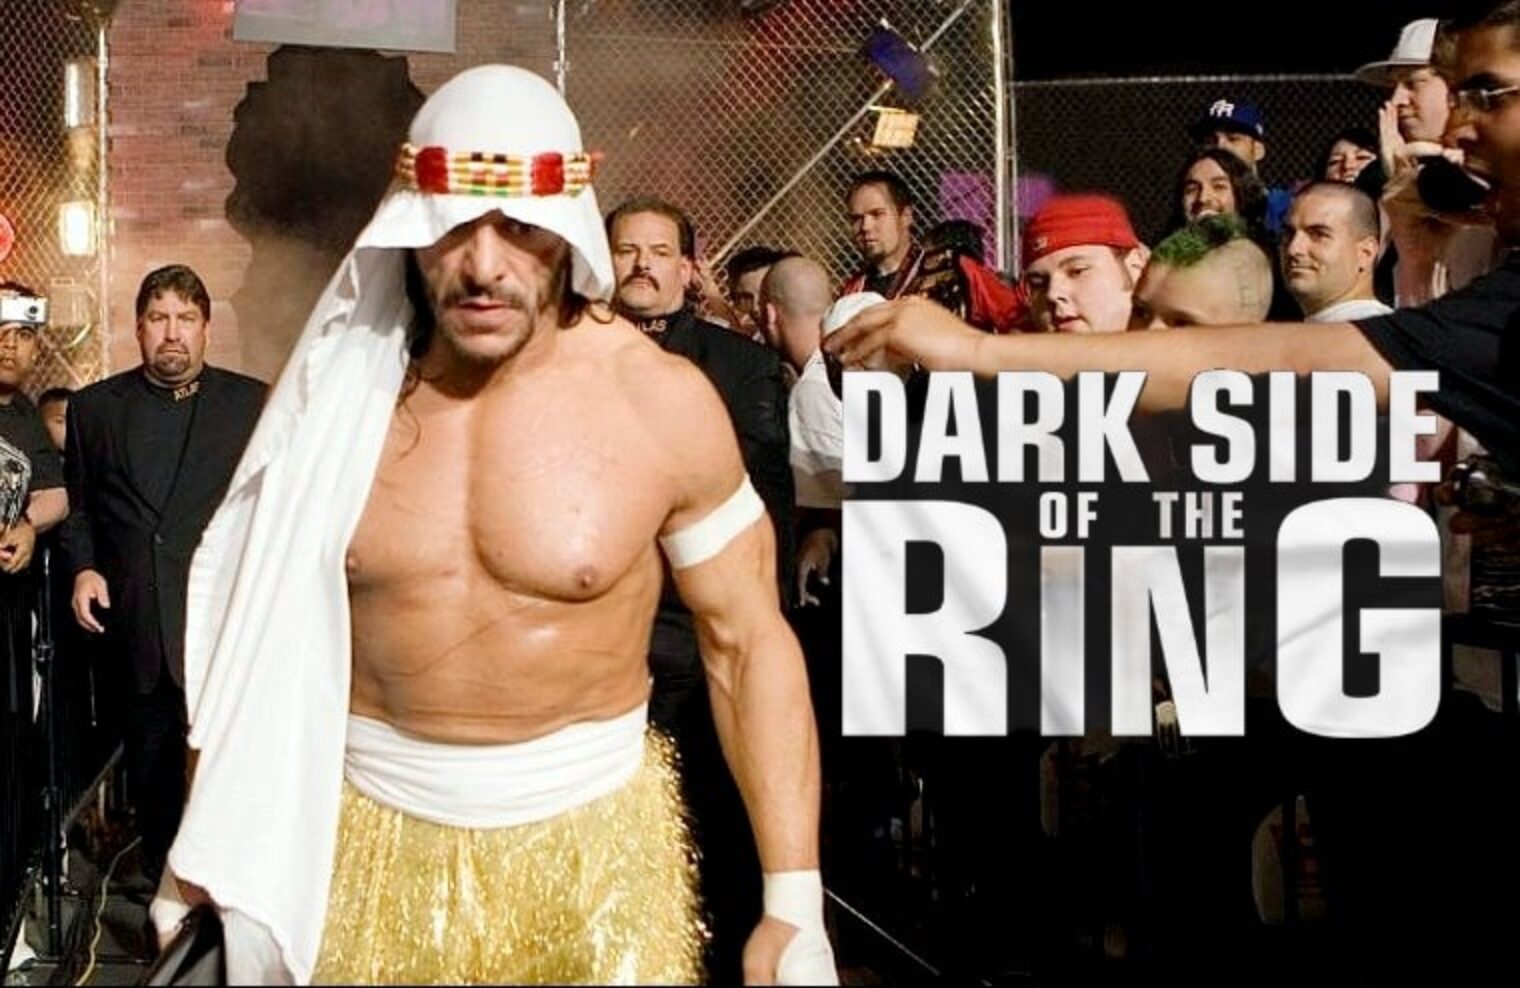 sabu interviewed for two upcoming "dark side of the ring"